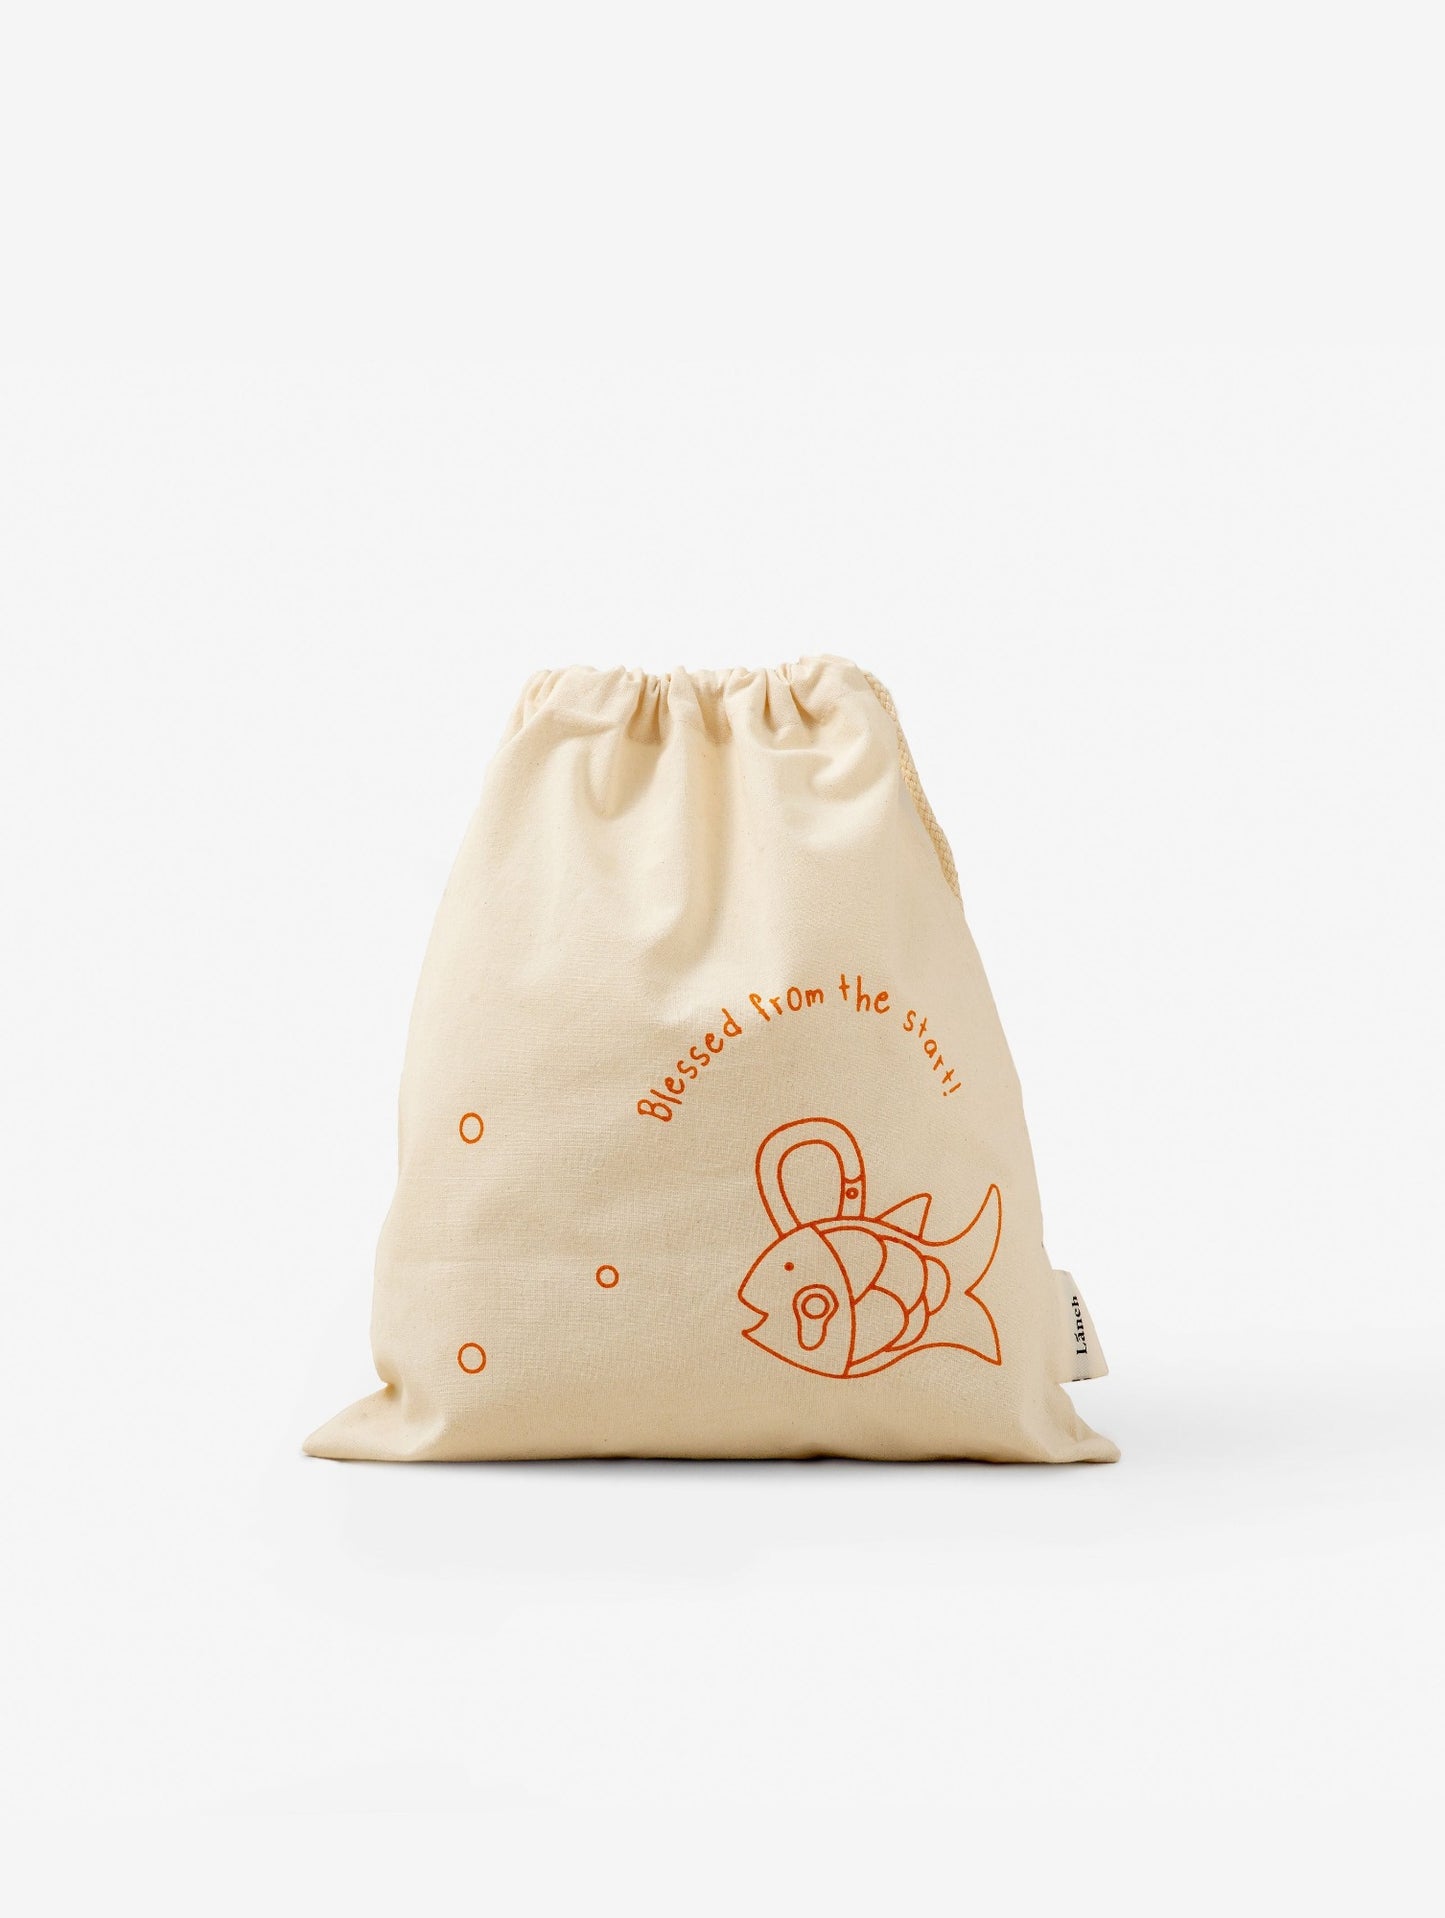 A white string bag with orange fish drawing 